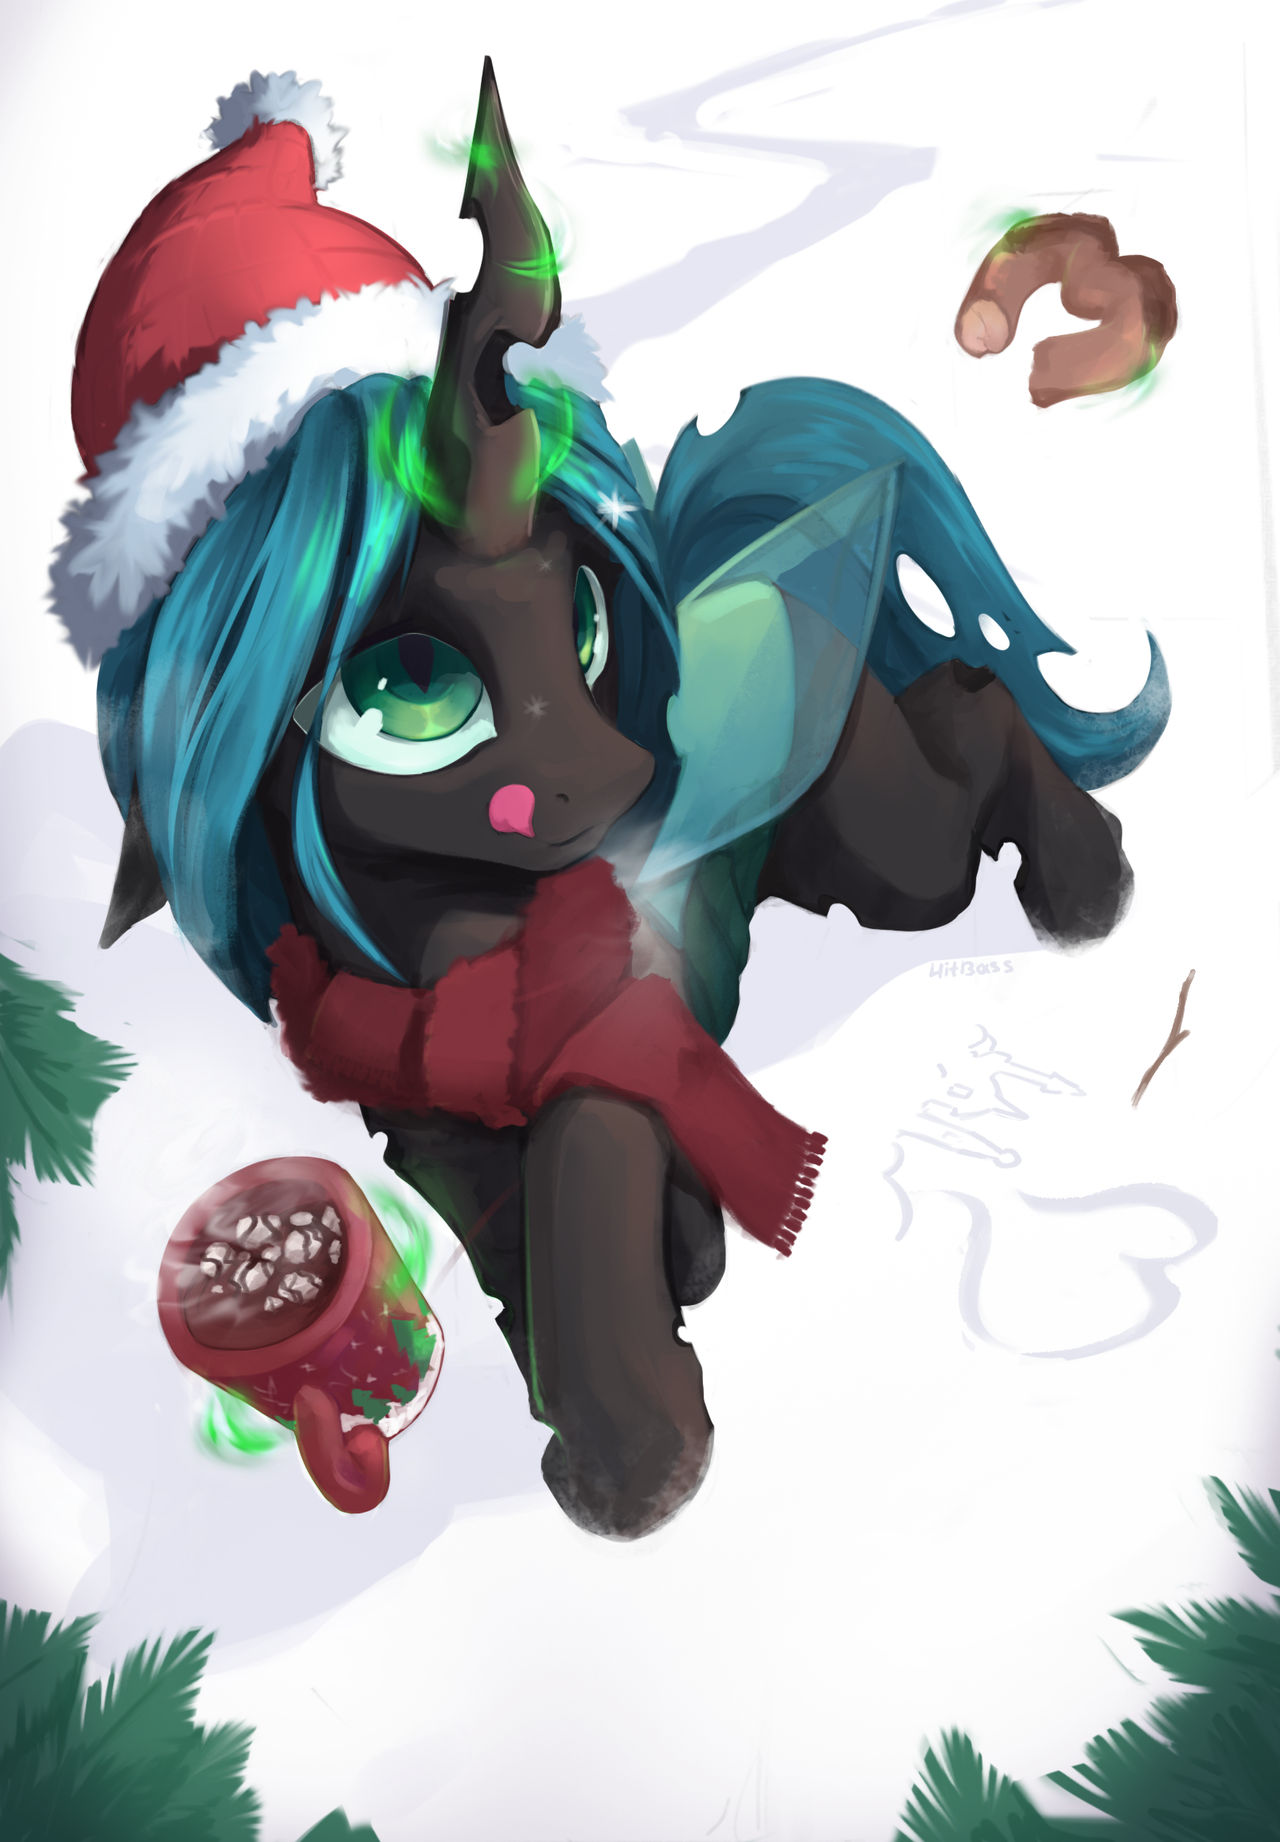 some_hot_chocolate_for_chrysalis_by_hitbass_dex0rxr-fullview.jpg